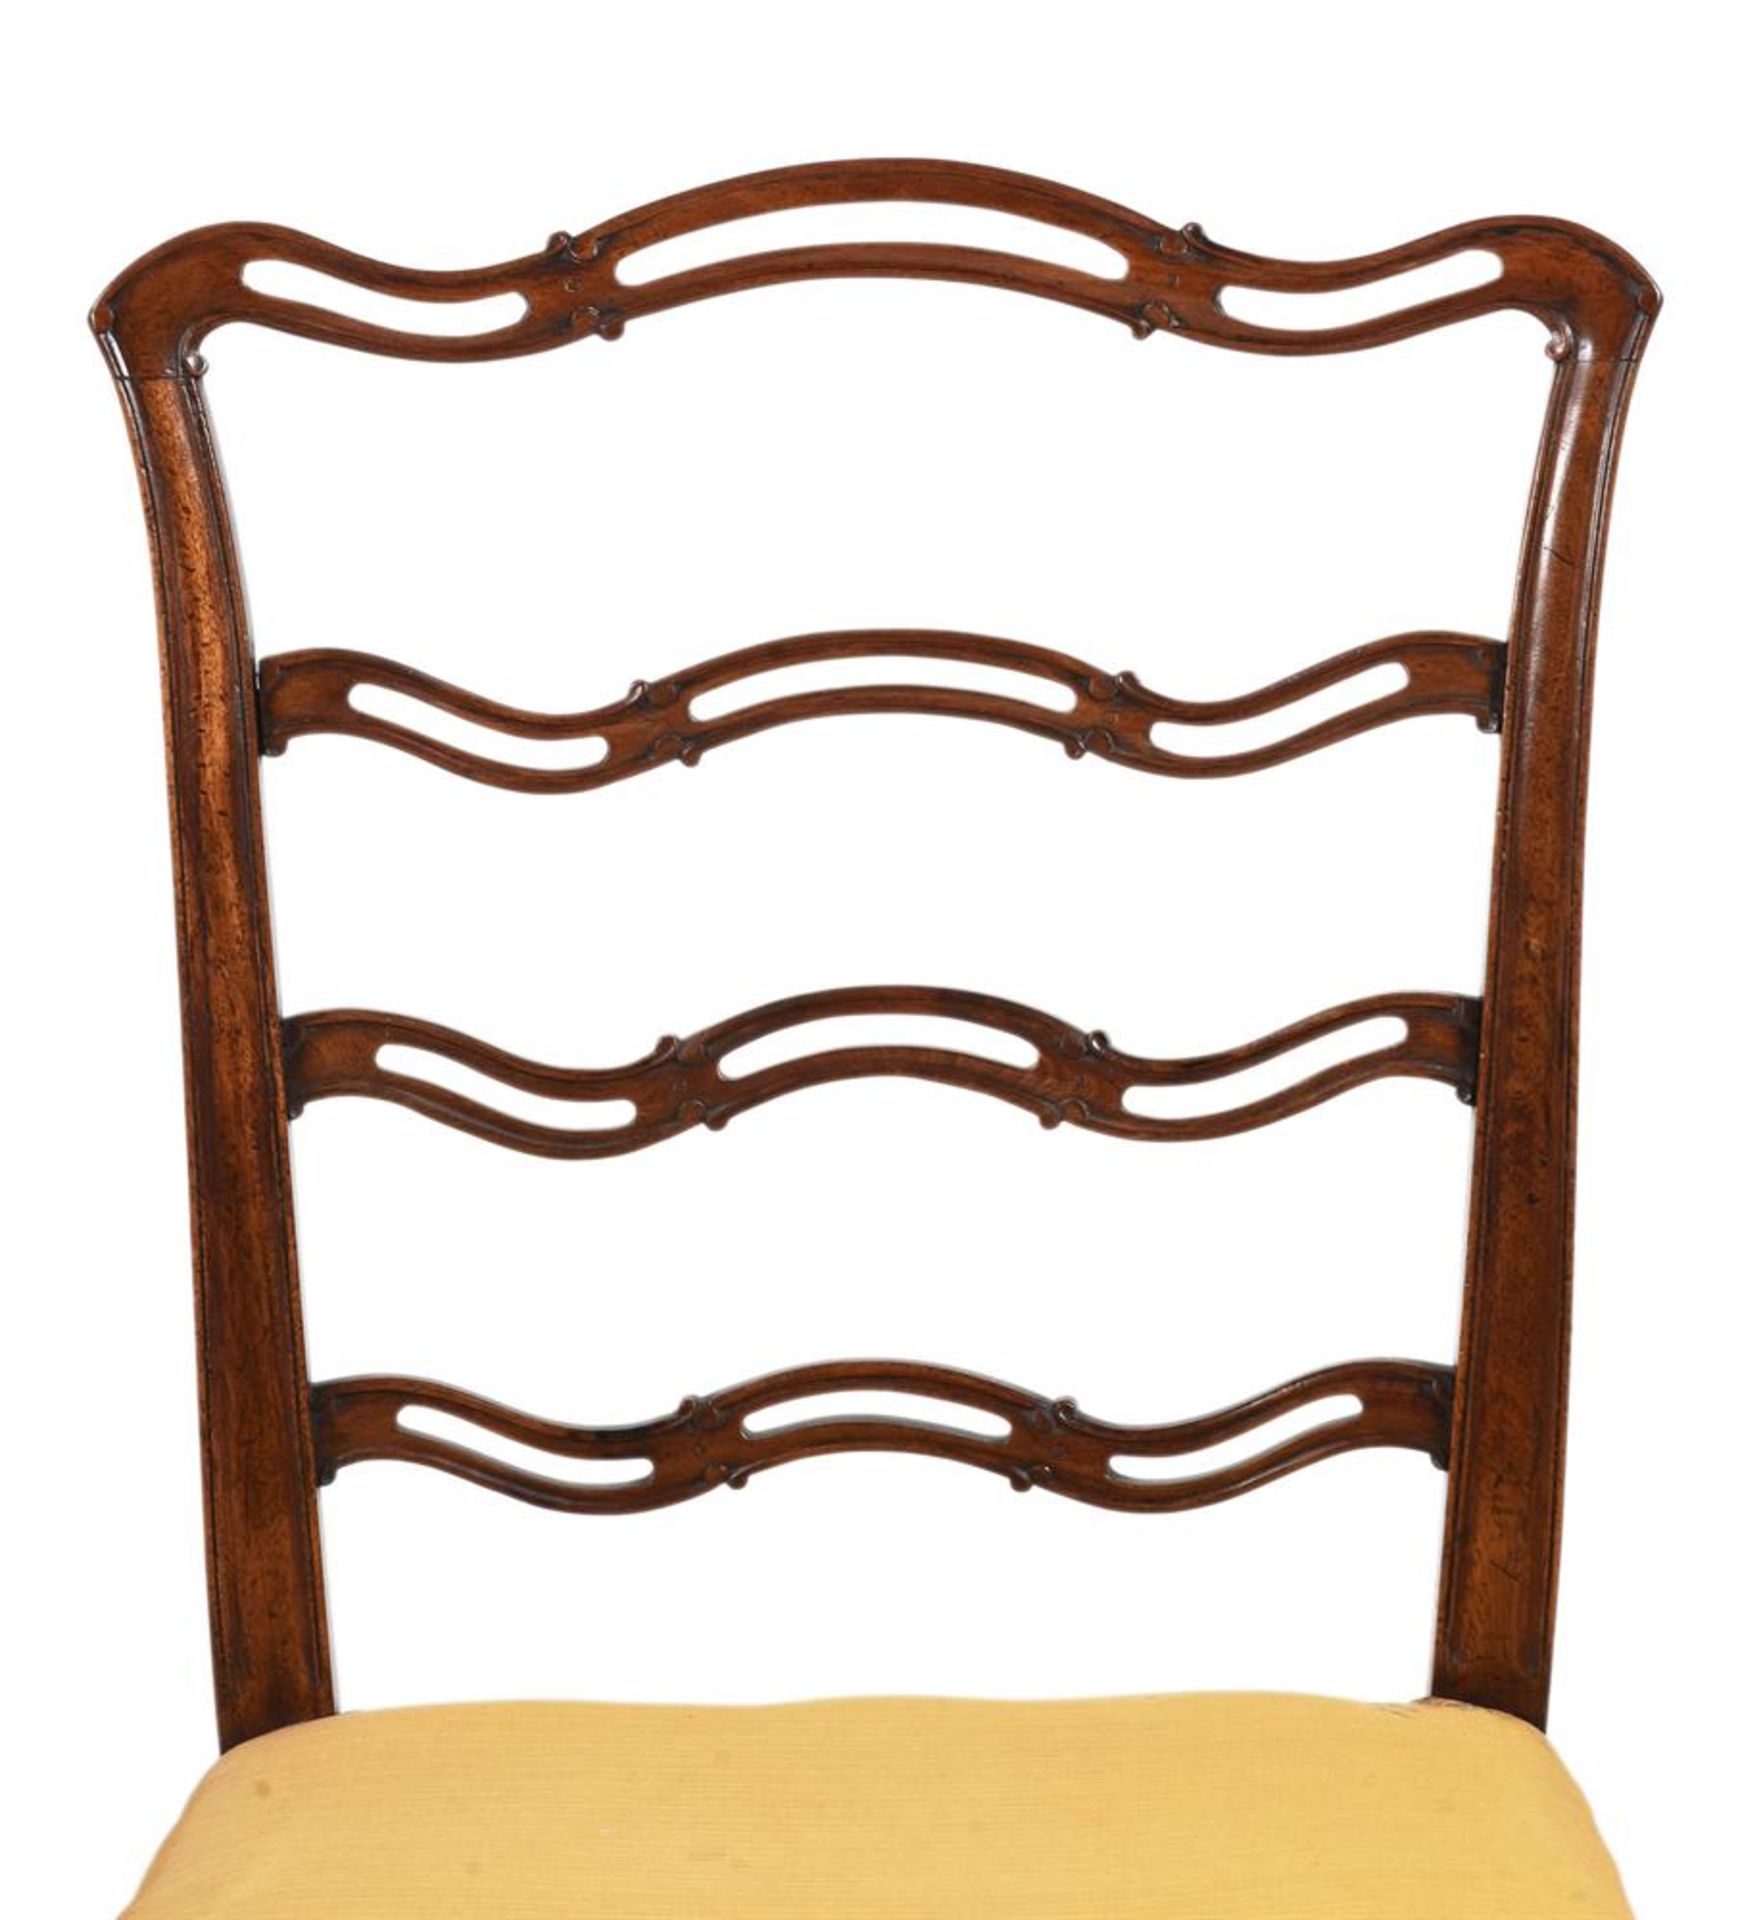 A HARLEQUIN SET OF FOURTEEN MAHOGANY AND UPHOLSTERED LADDERBACK DINING CHAIRS, LATE 19TH CENTURY - Image 6 of 6